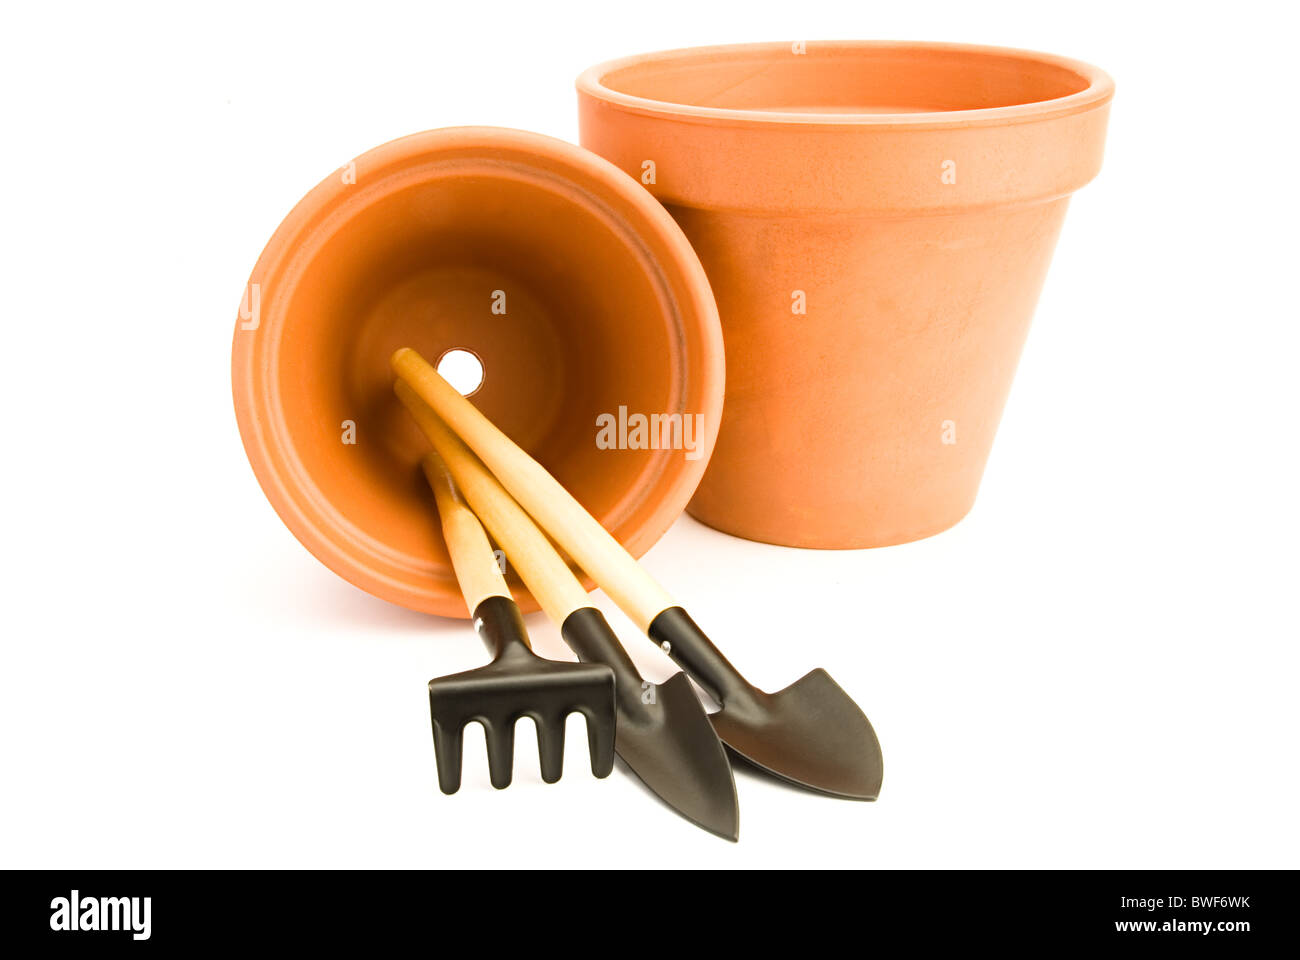 terracotta flower pots and gardening tools Stock Photo